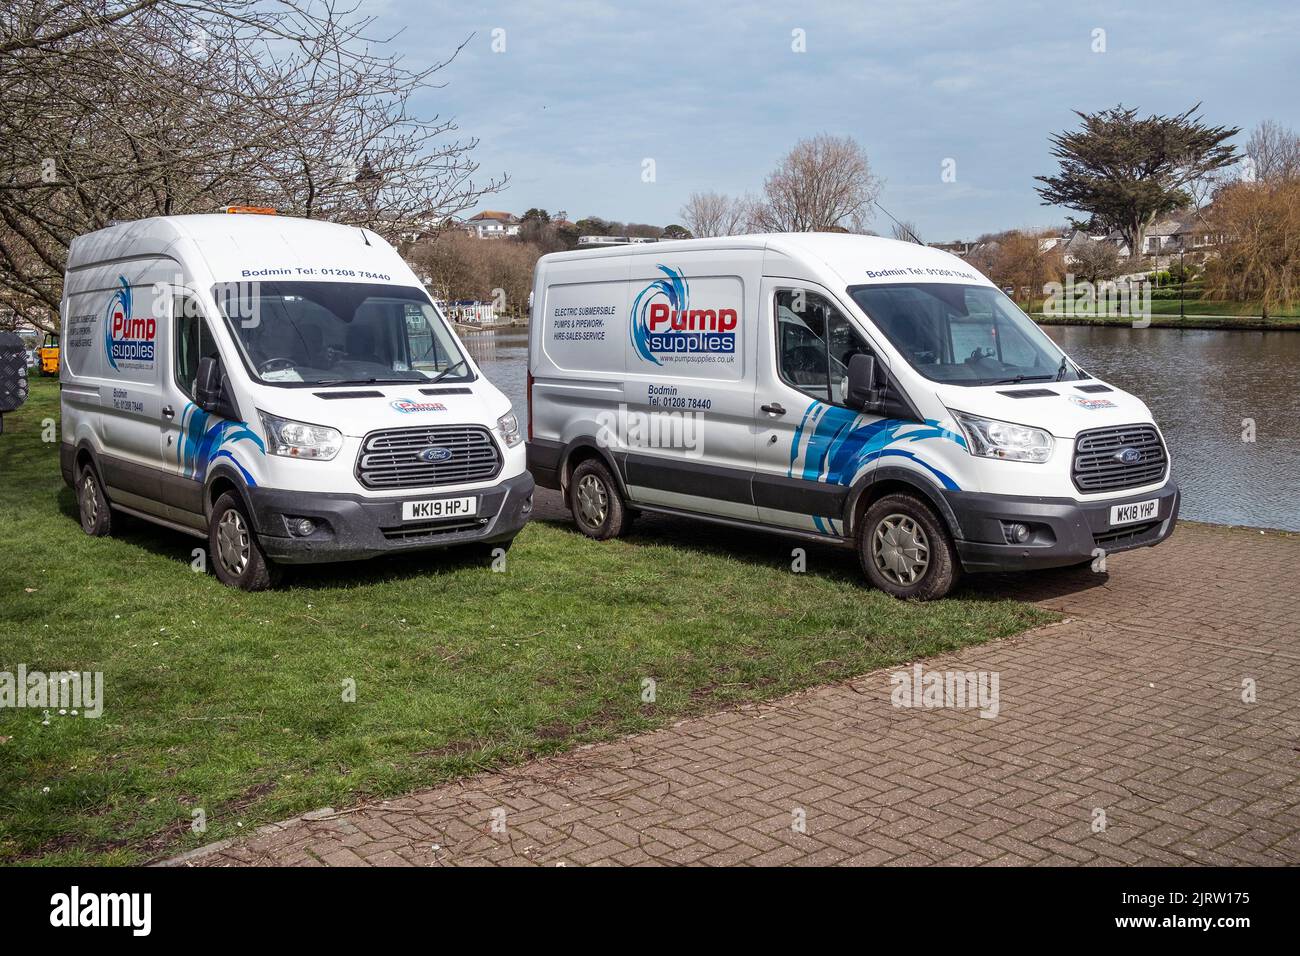 Two vehicles from a local Cornish company called Pump Supplies parked at Trenance Boating Lake in Newquay in Cornwall in the UK. Stock Photo